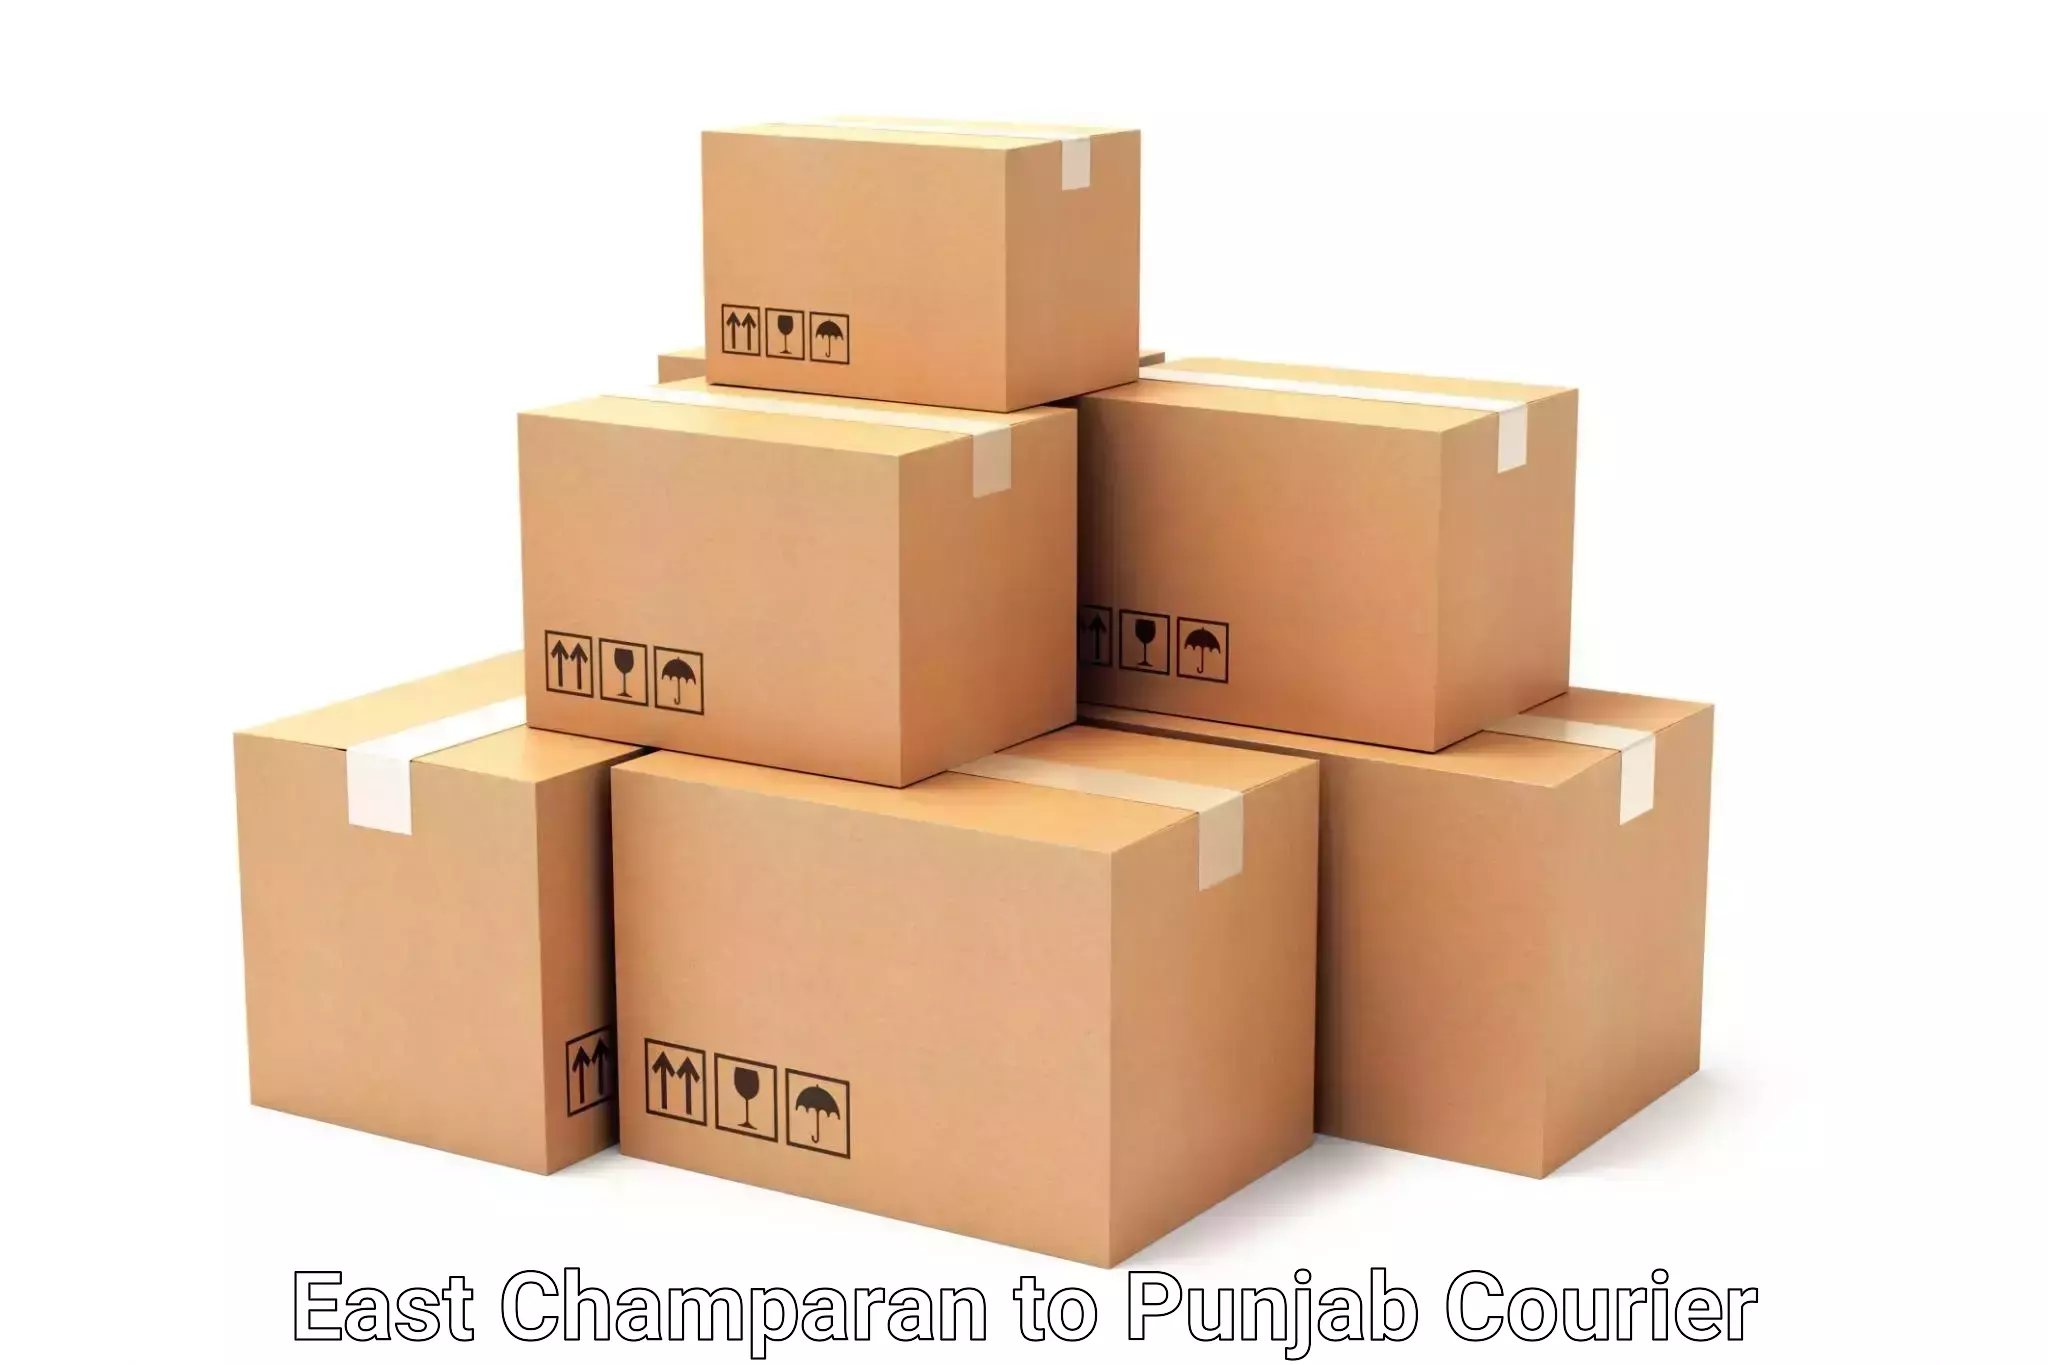 Luggage shipment specialists East Champaran to Bathinda